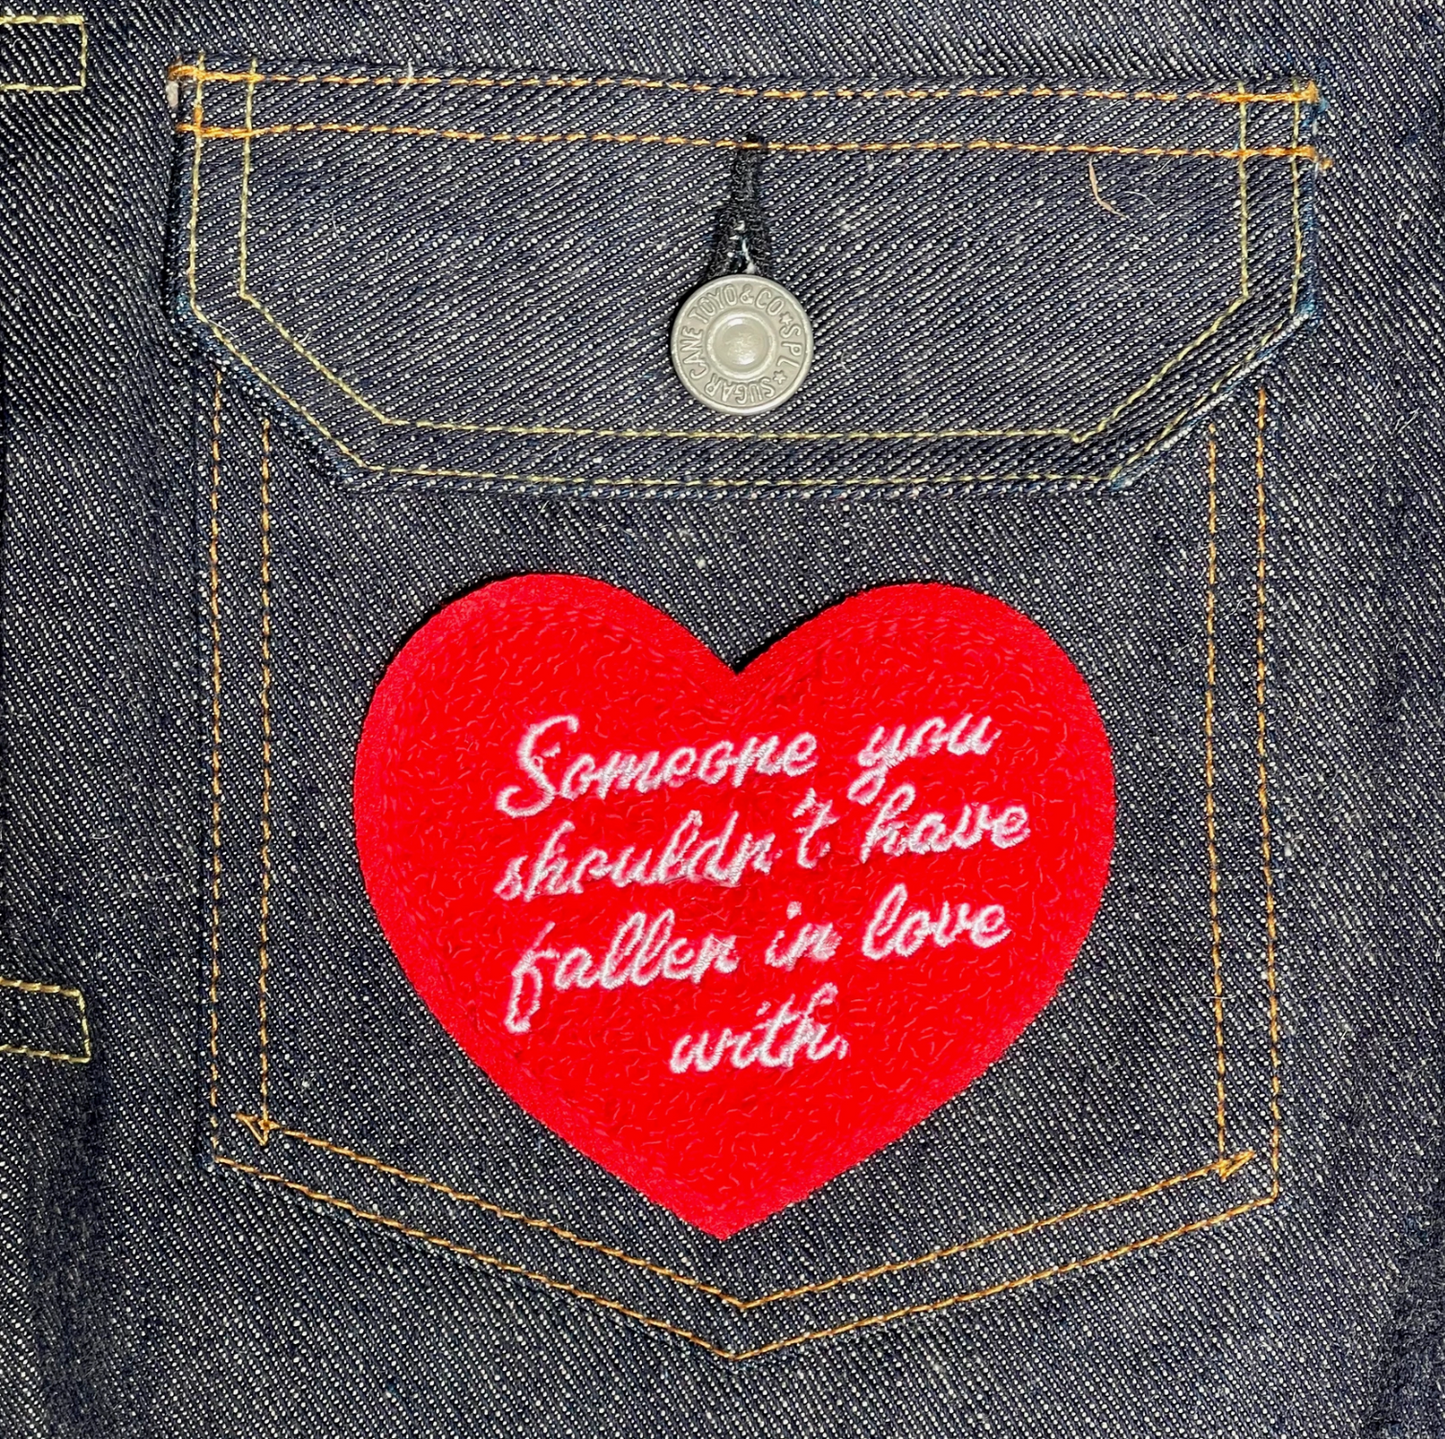 Fallen In Love Patch by World Famous Original